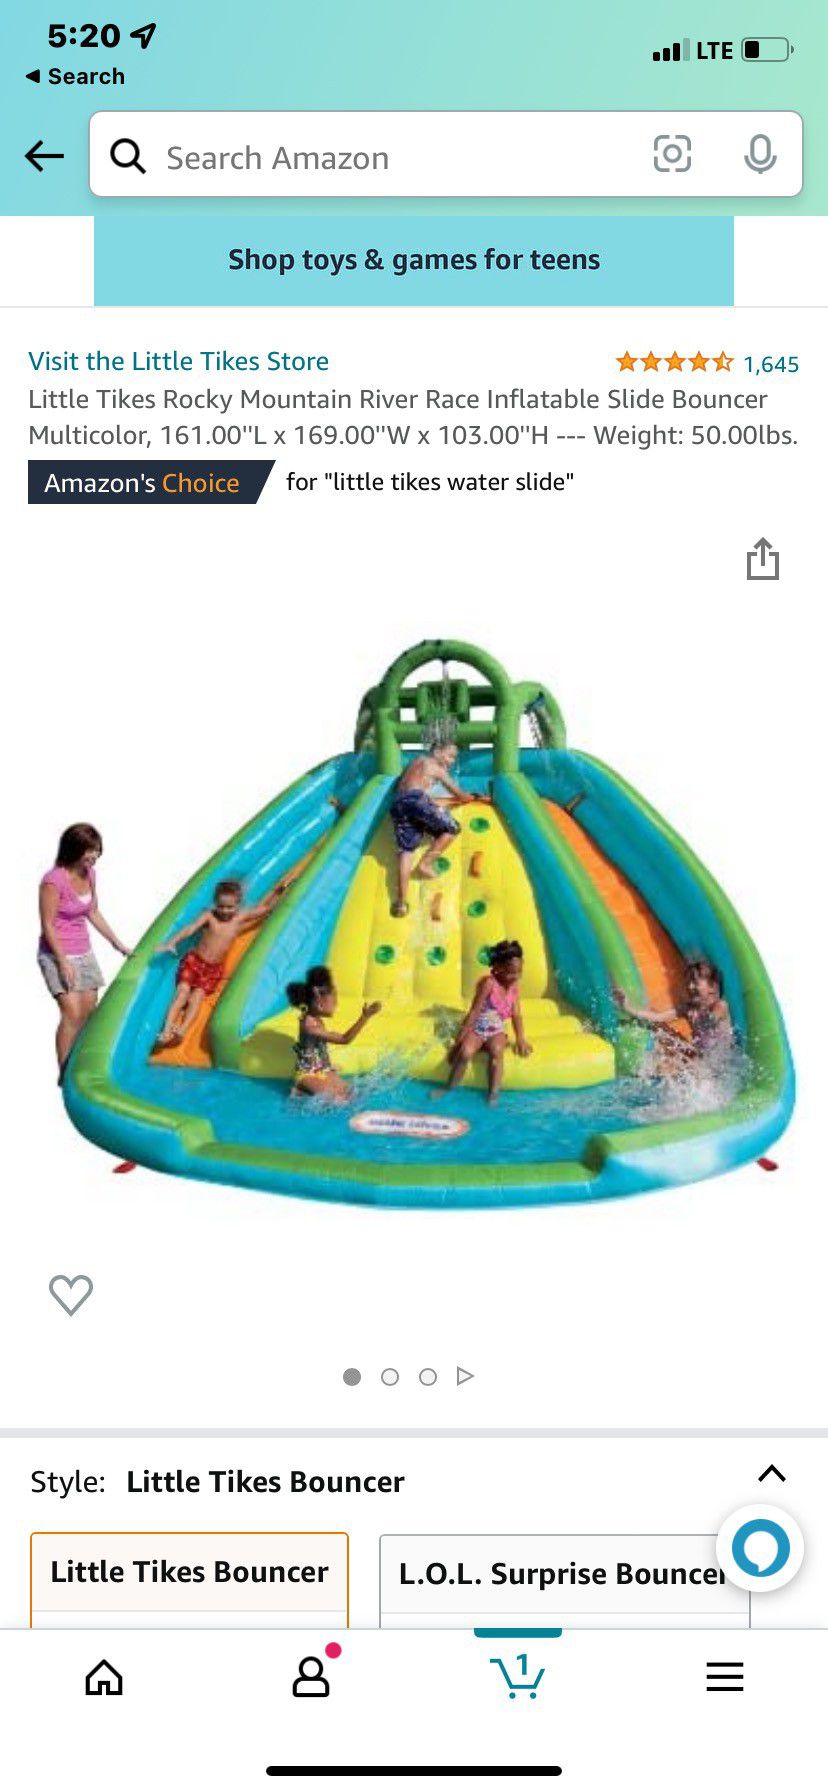 Little Tikes Rocky Mountain River Race Inflatable Bouncer